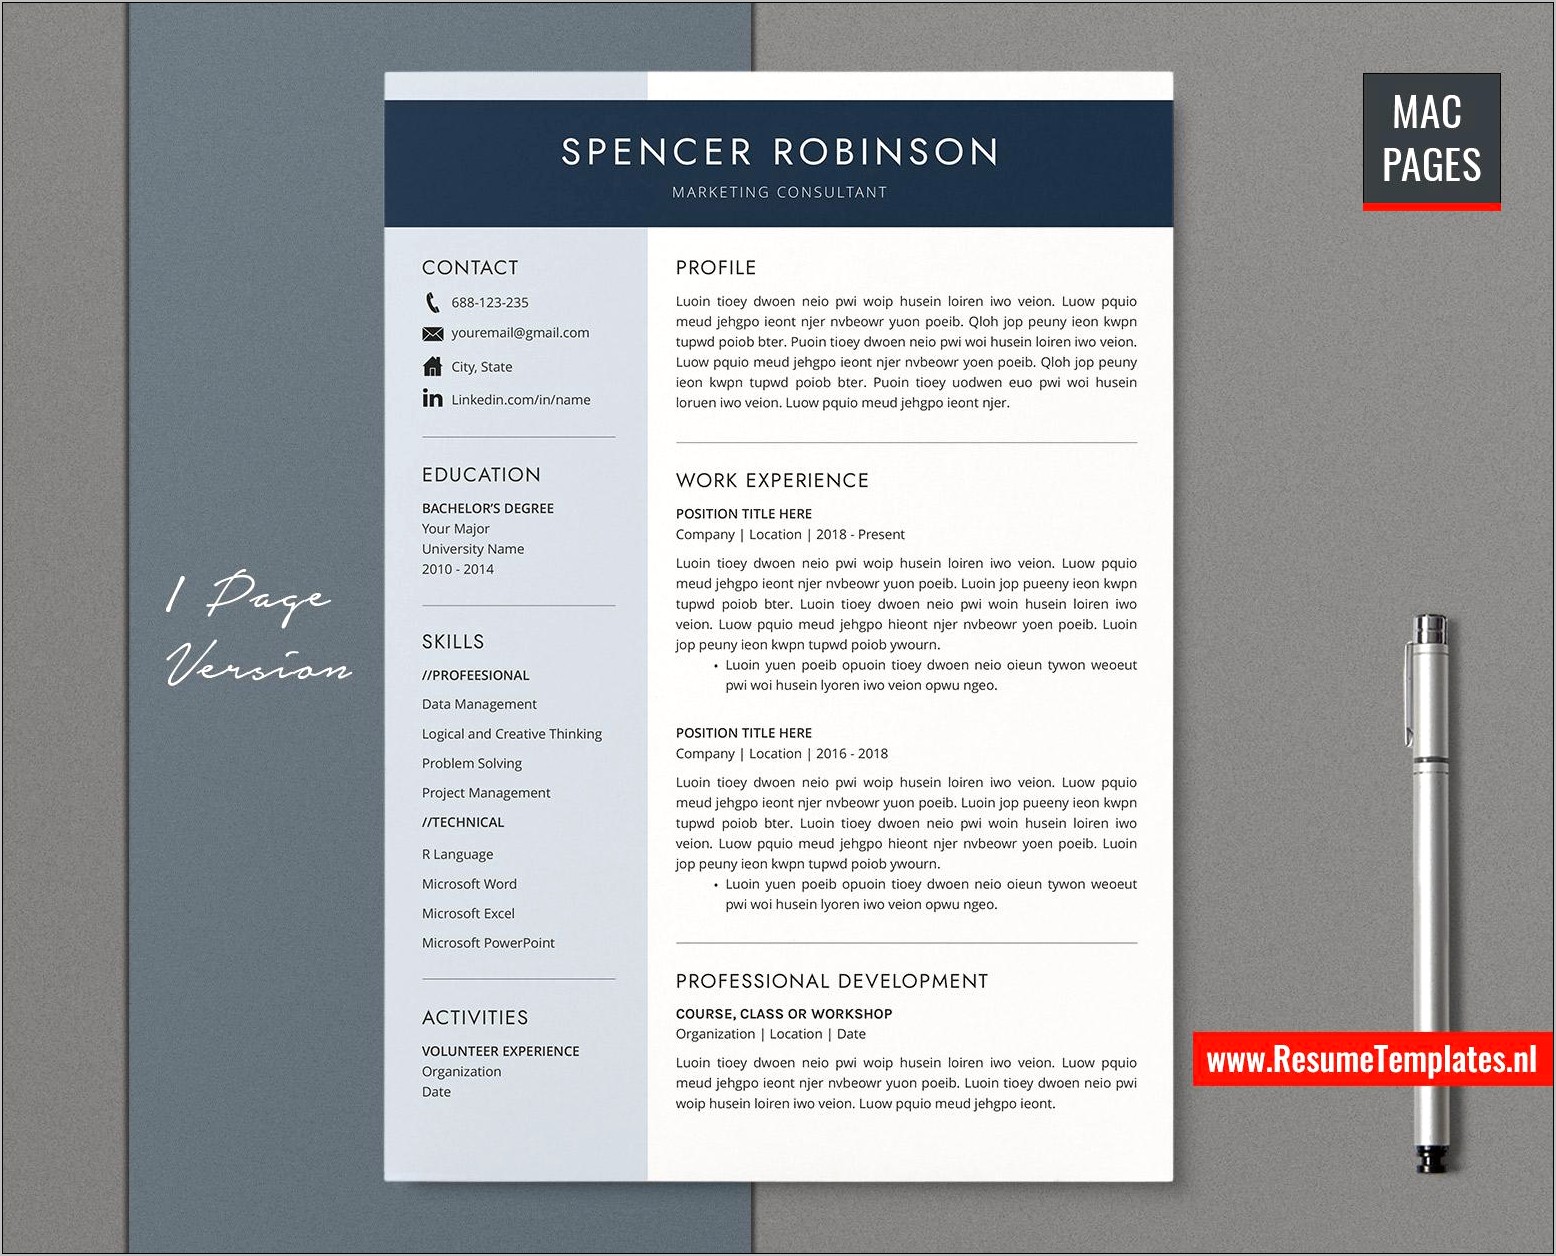 Download Resume Templates For Mac Pages